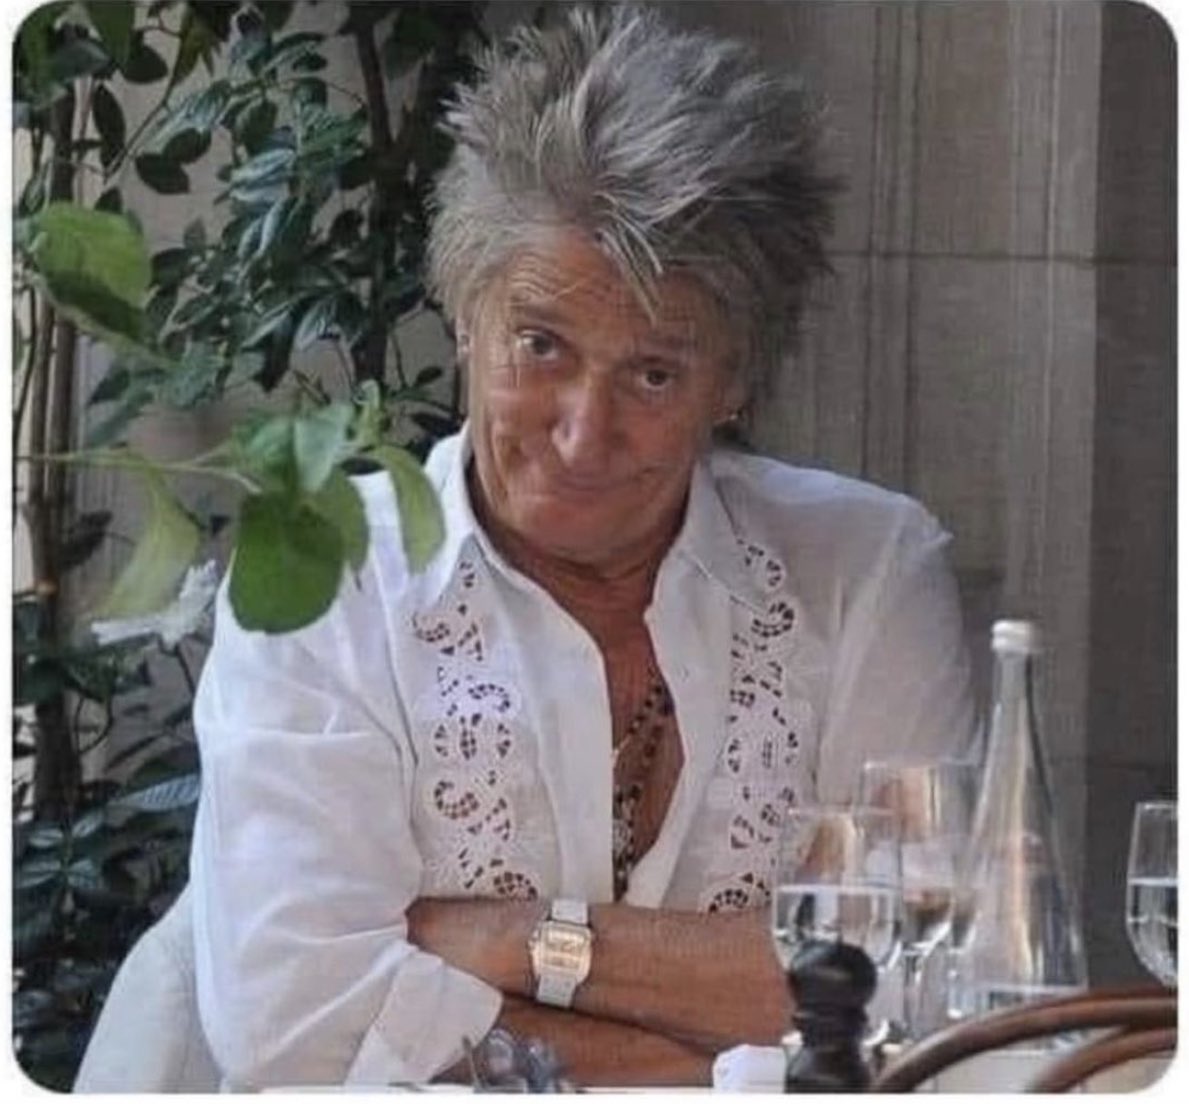 Is it just me or does Rod Stewart look like both Jenny and Lee from Gogglebox in this picture?